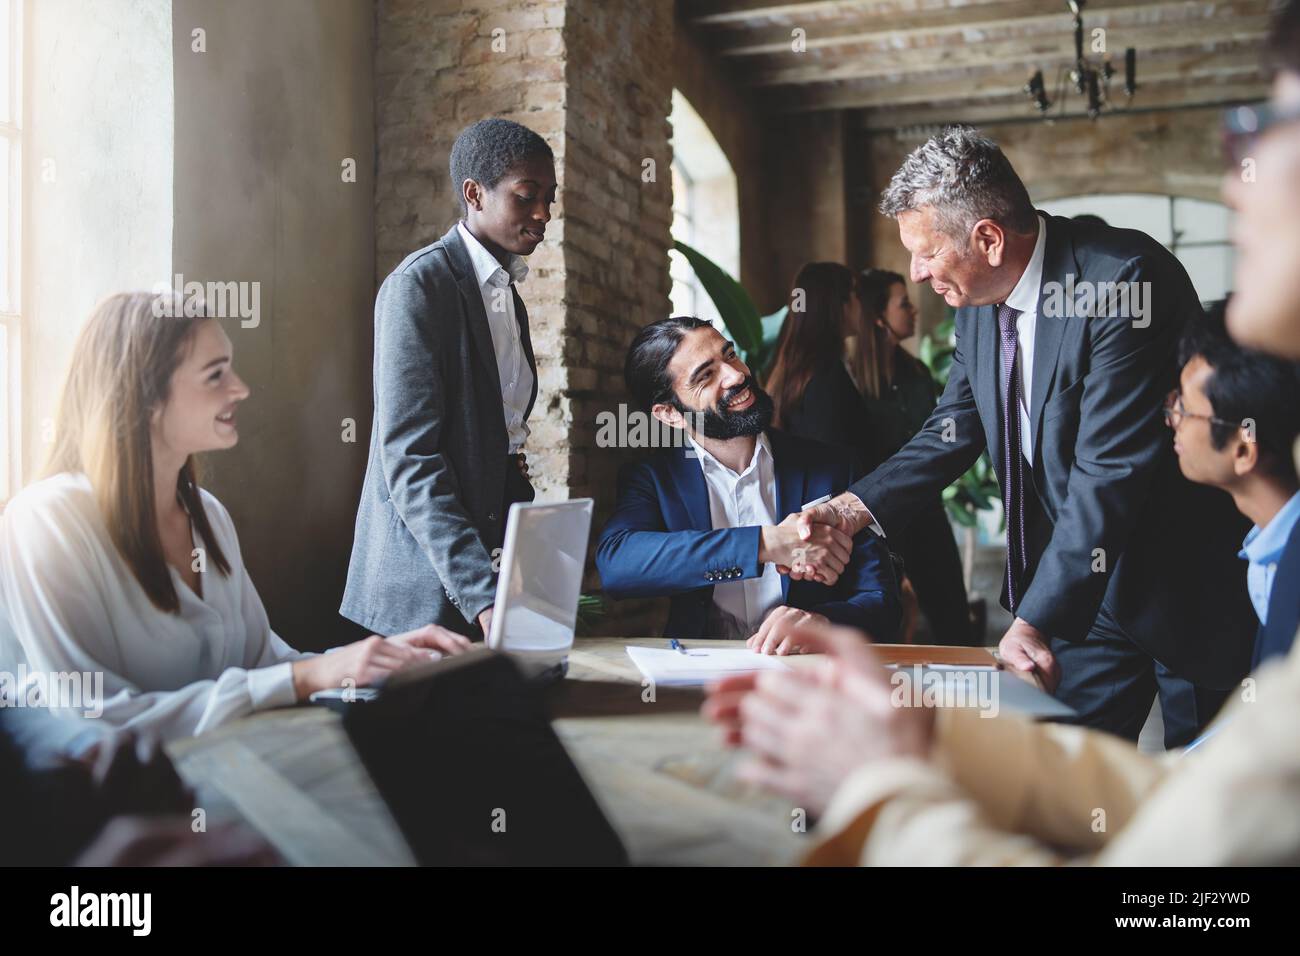 Two businessmen make a deal by shaking hands sitting at a table together with other multiracial employees - business lifestyle and agreements concept Stock Photo